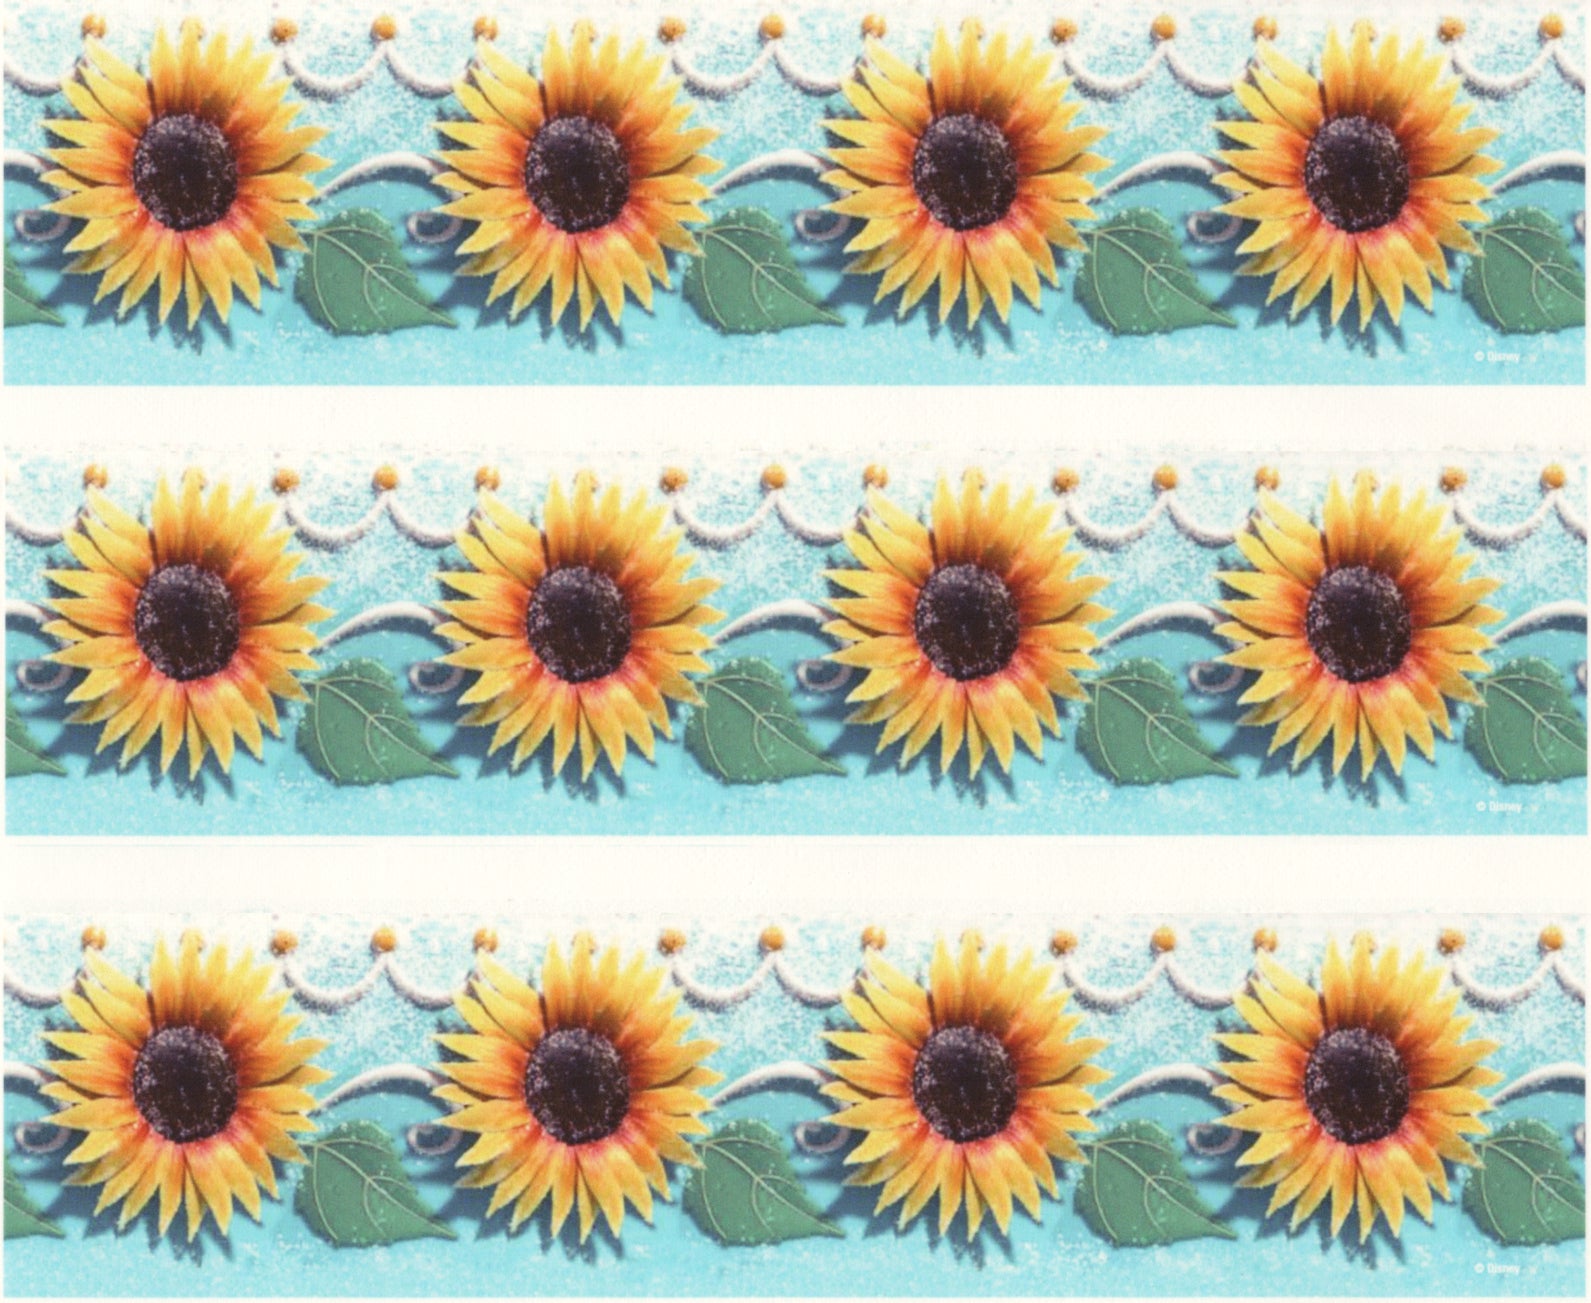 Yellow Sunflowers Green Leaves Edible Cake Topper Image Strips ABPID03798